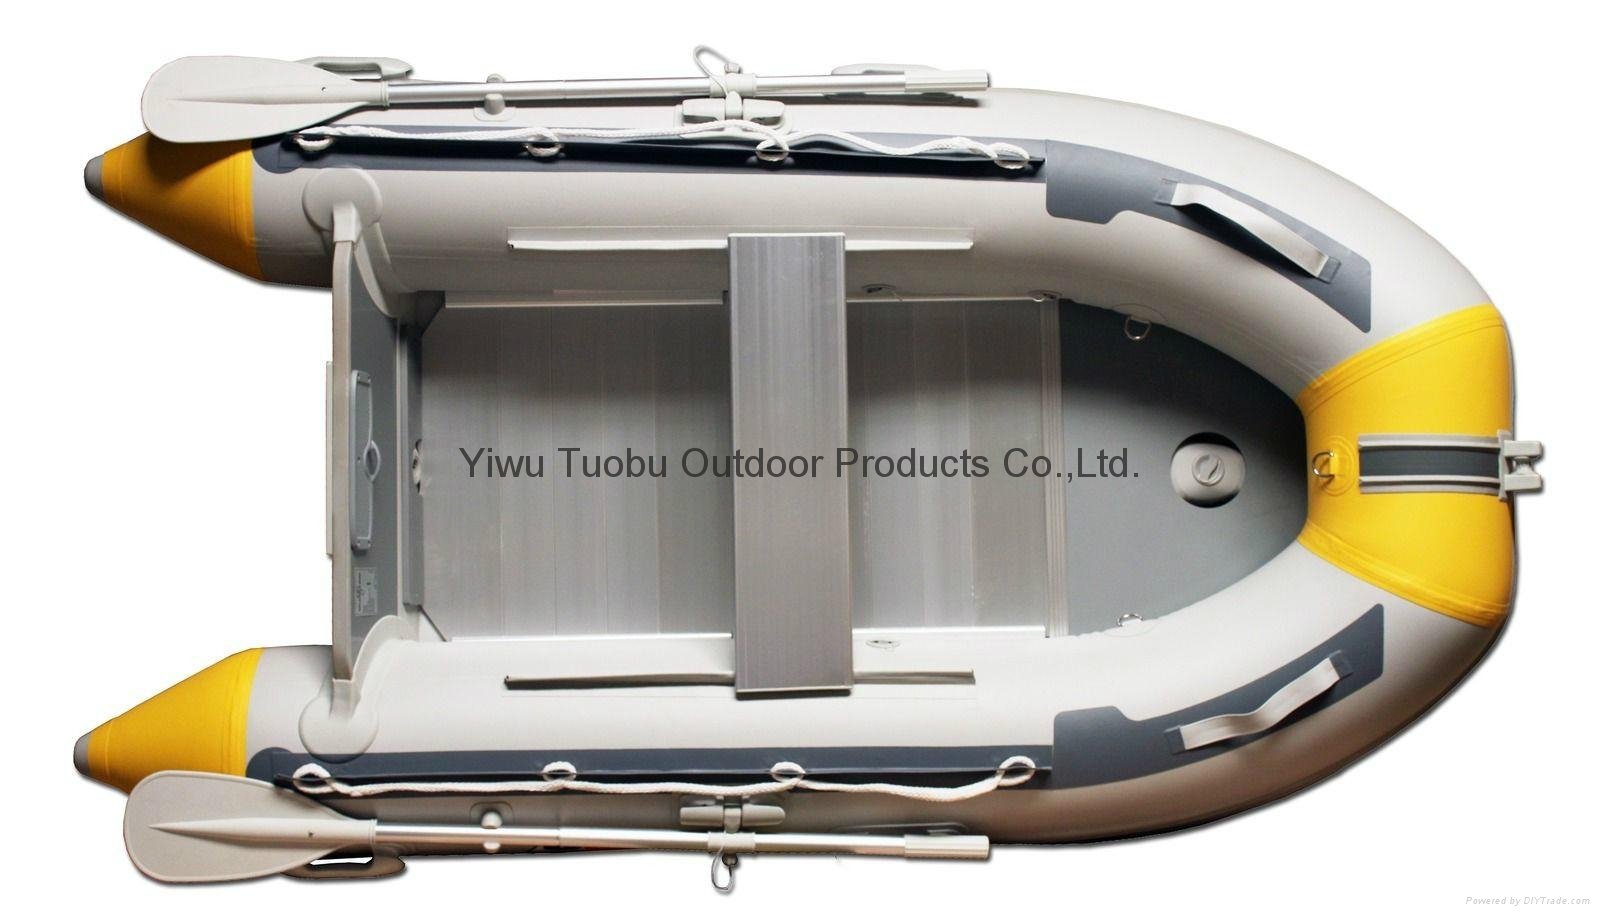 8.8 ft Inflatable Boat Dinghy Yacht Tender Fishing Raft with Aluminum Floor 3